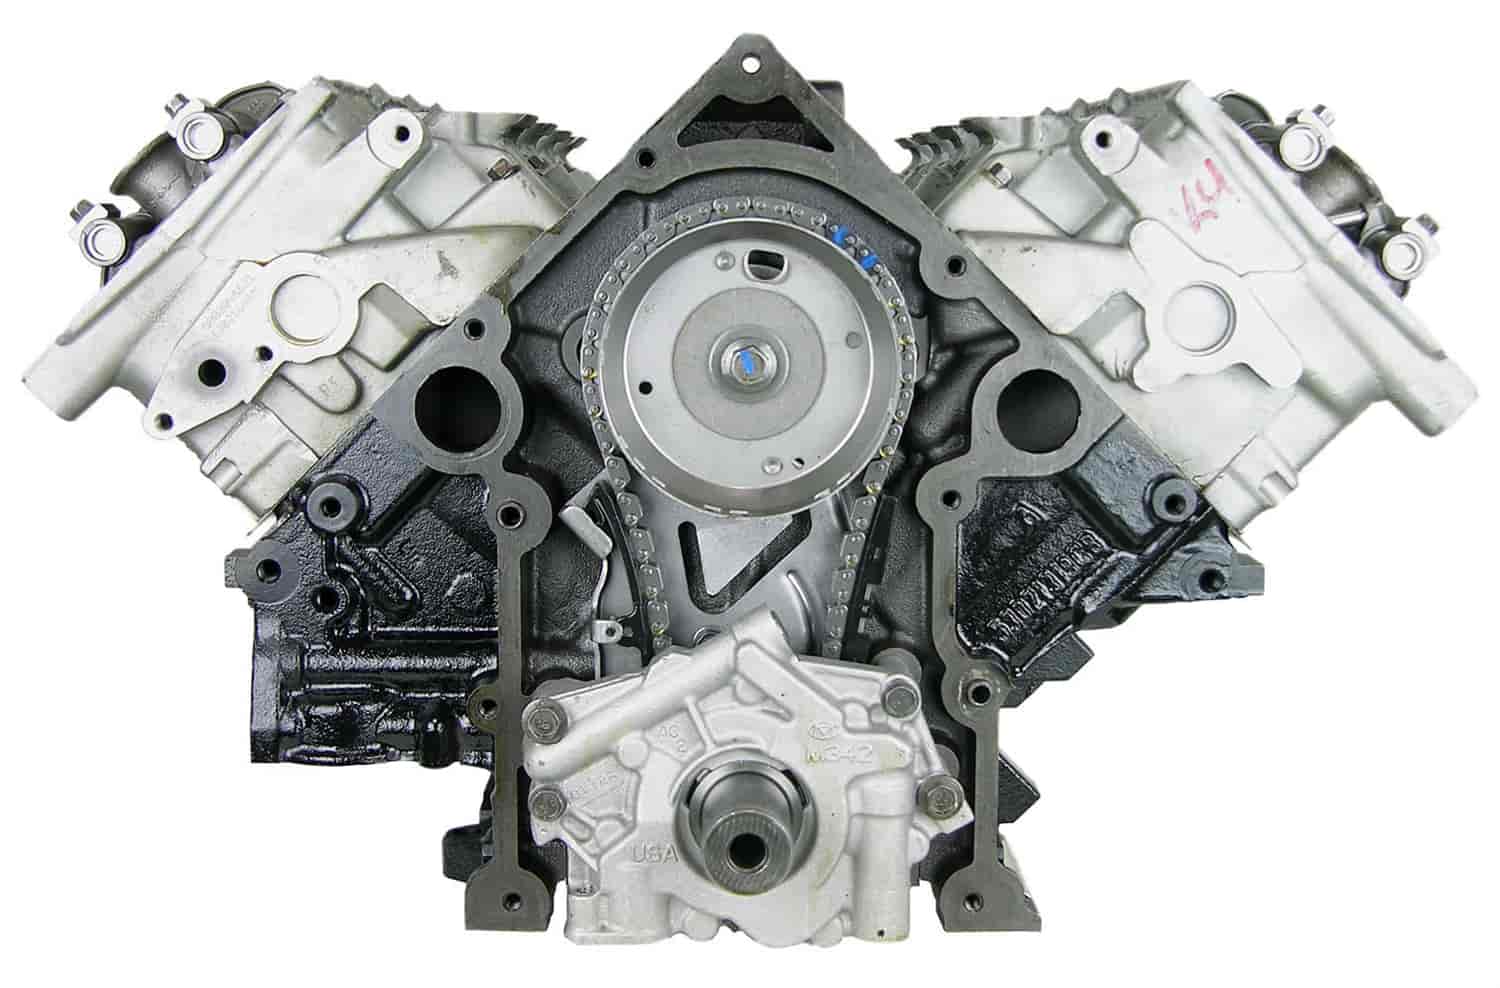 Remanufactured Crate Engine for 2006-2008 Dodge Ram Truck & Durango with 5.7L HEMI V8